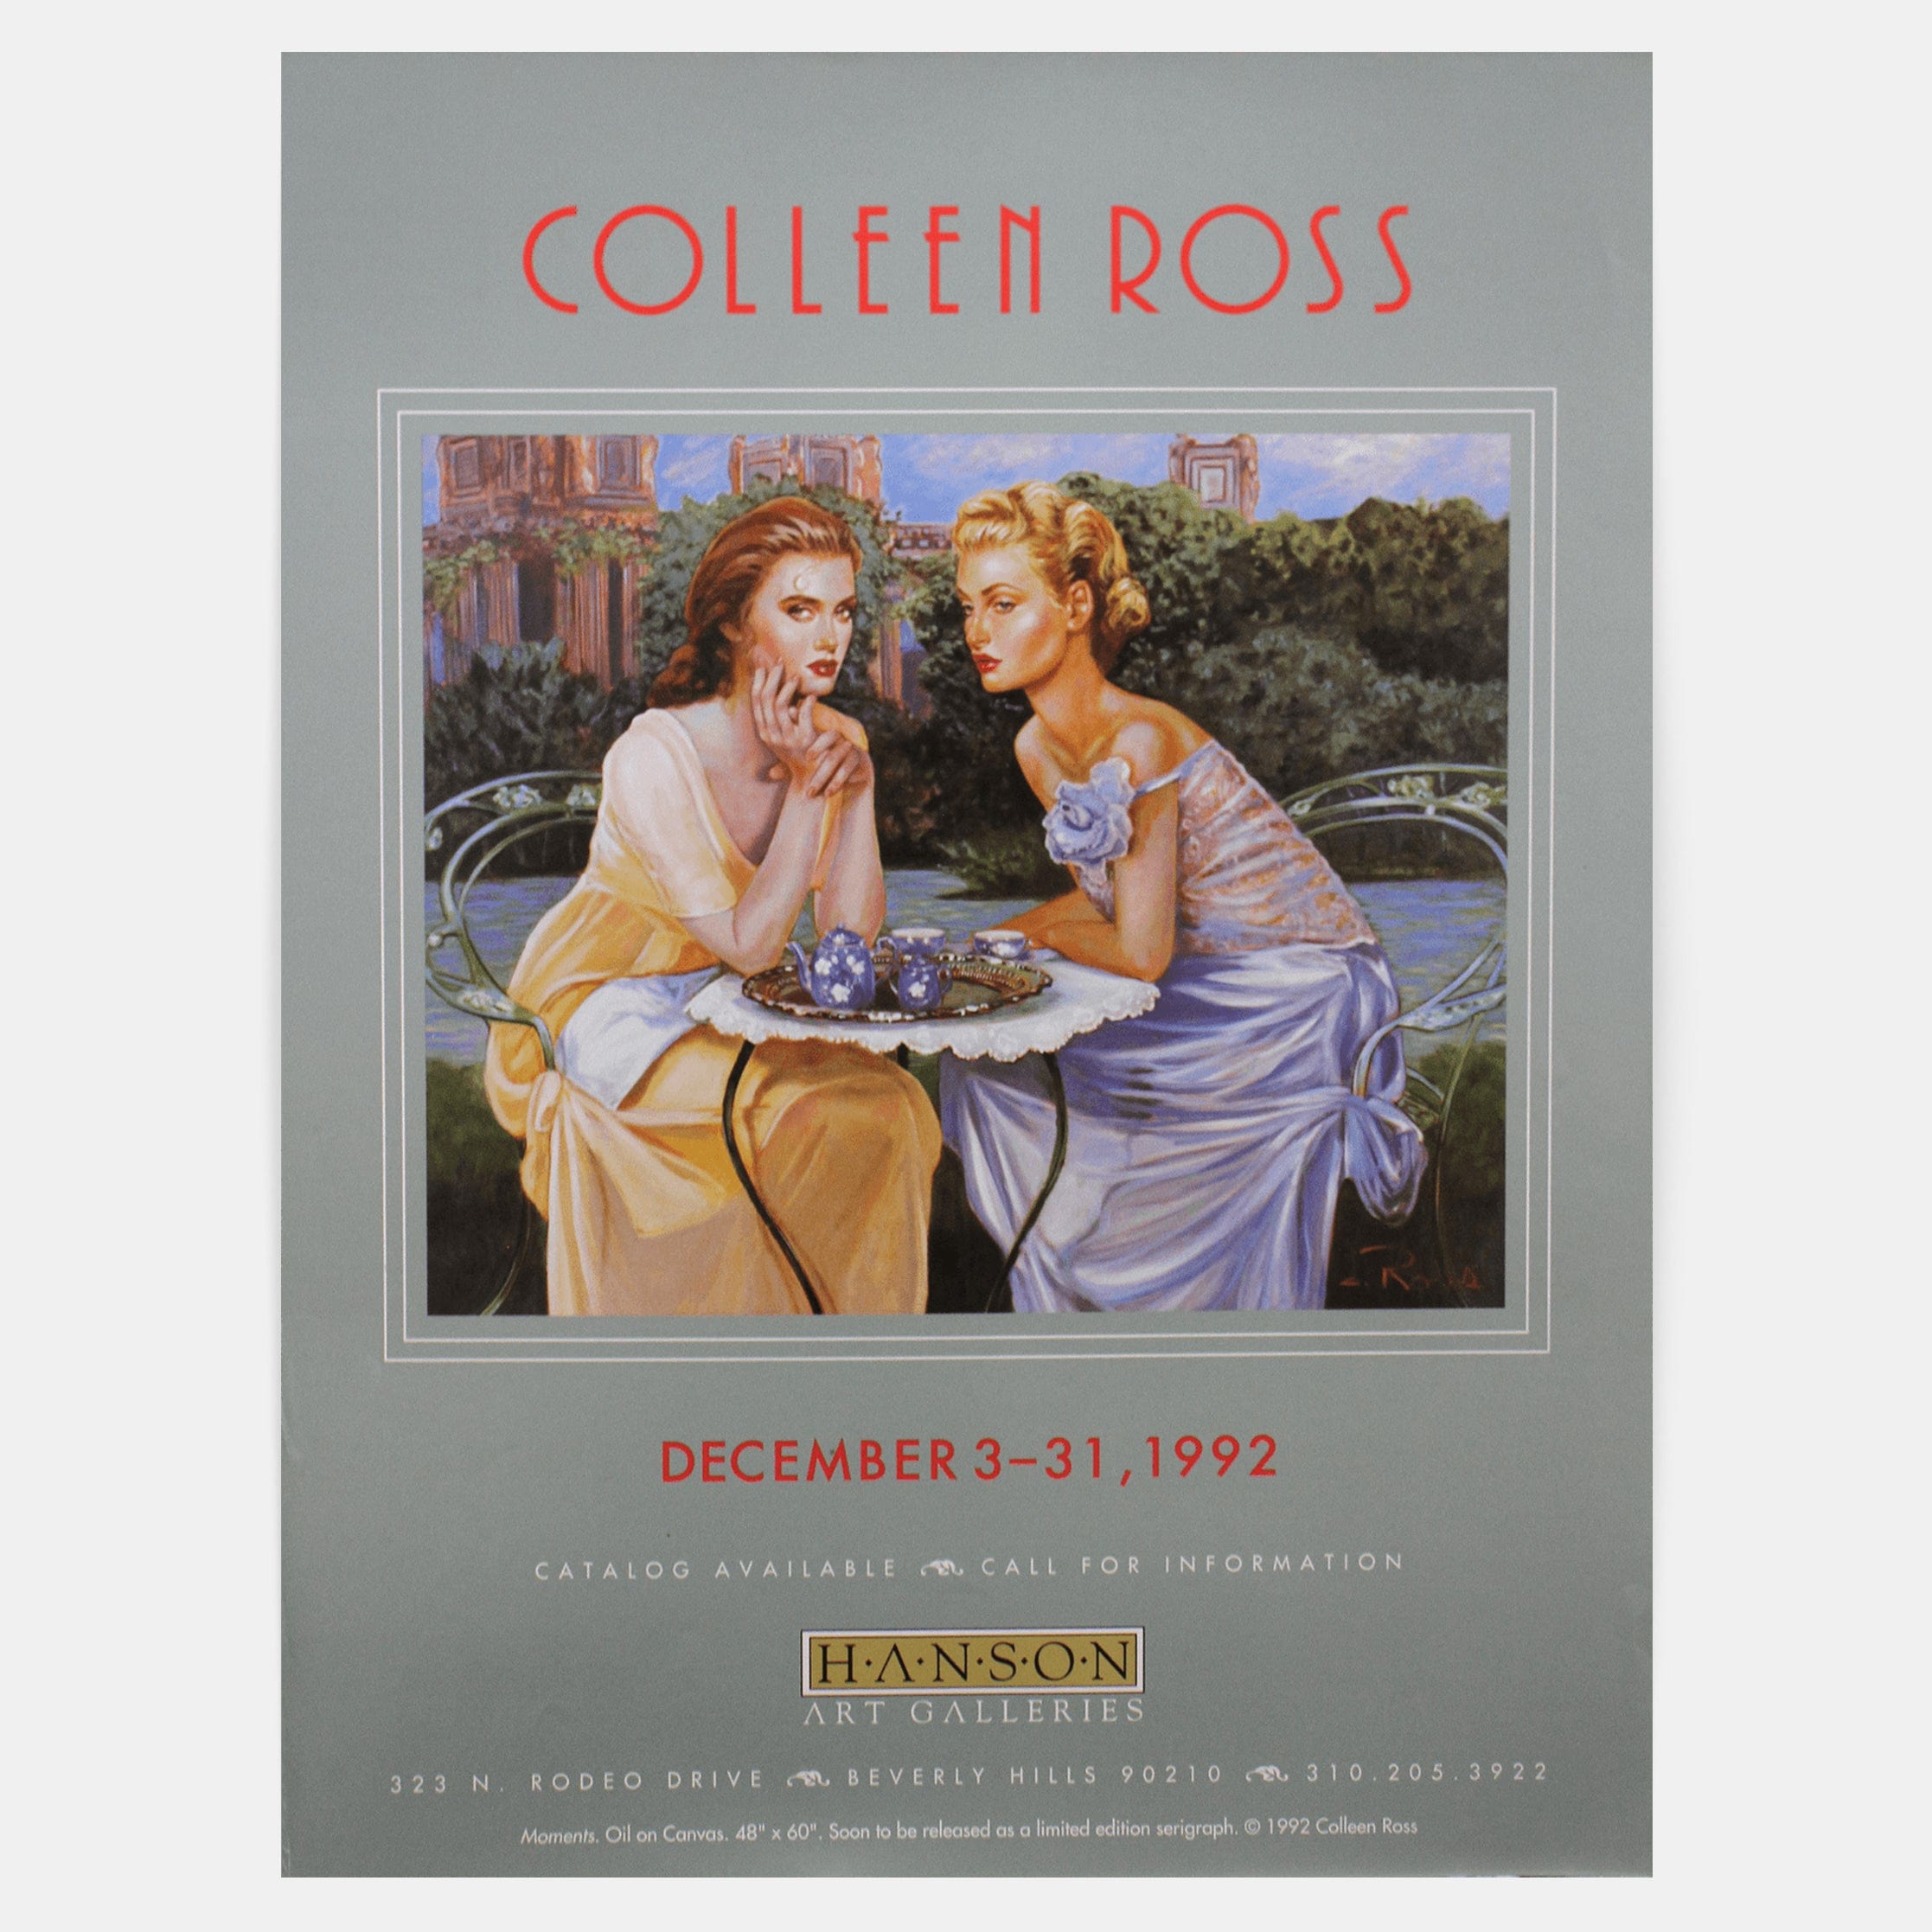 Colleen Ross Fine Art Gallery Poster Moments Poster, 1992